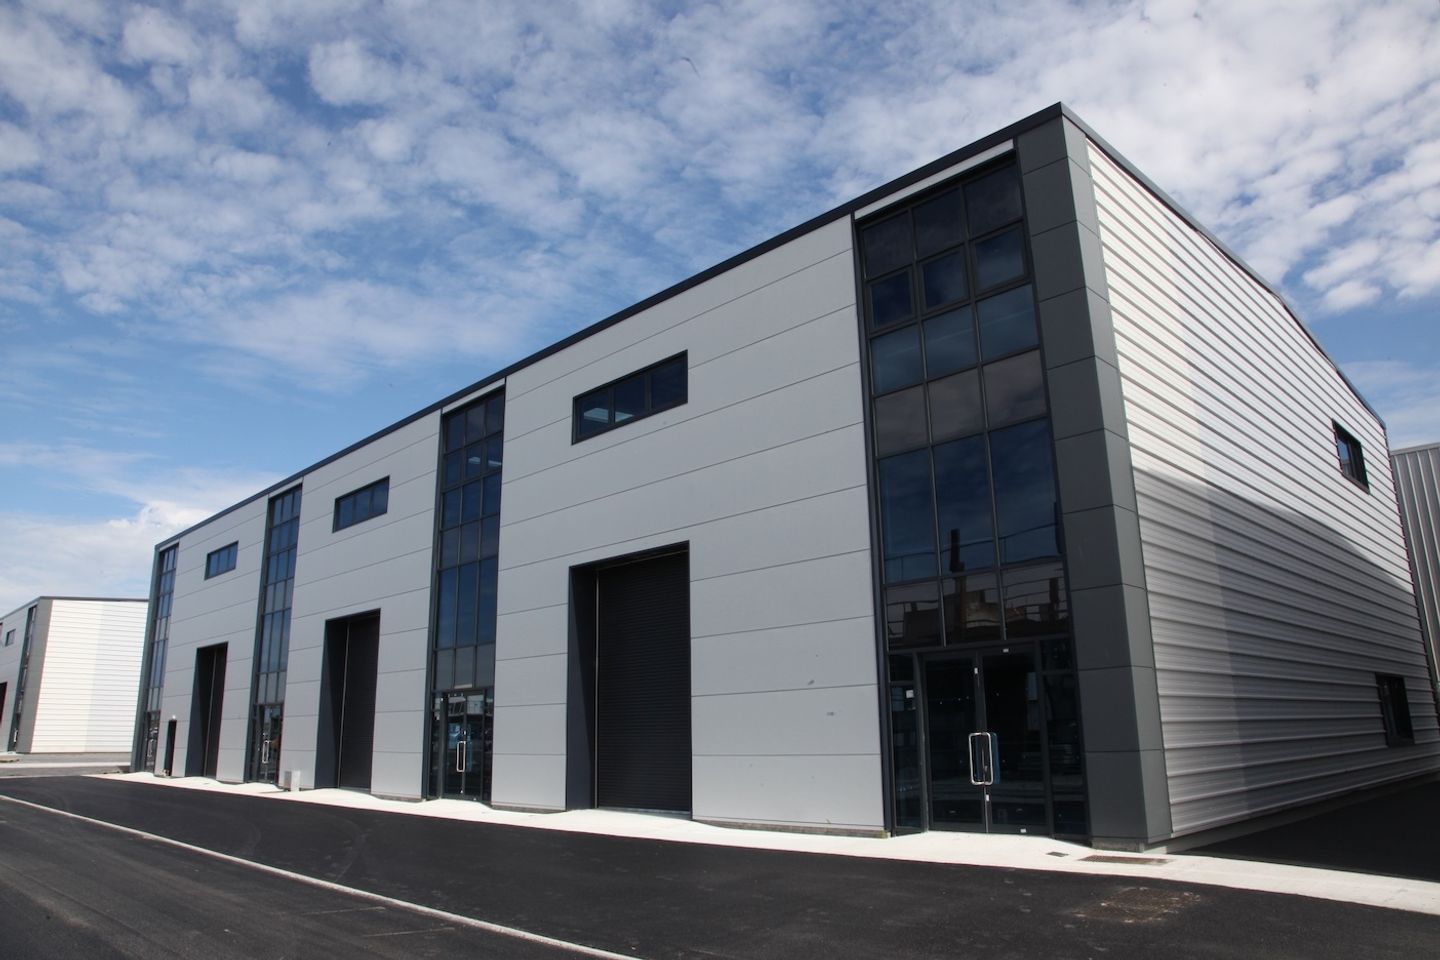 Unit 3, First Floor, Racecourse Technology Park, Ballybrit, Galway City, Co. Galway